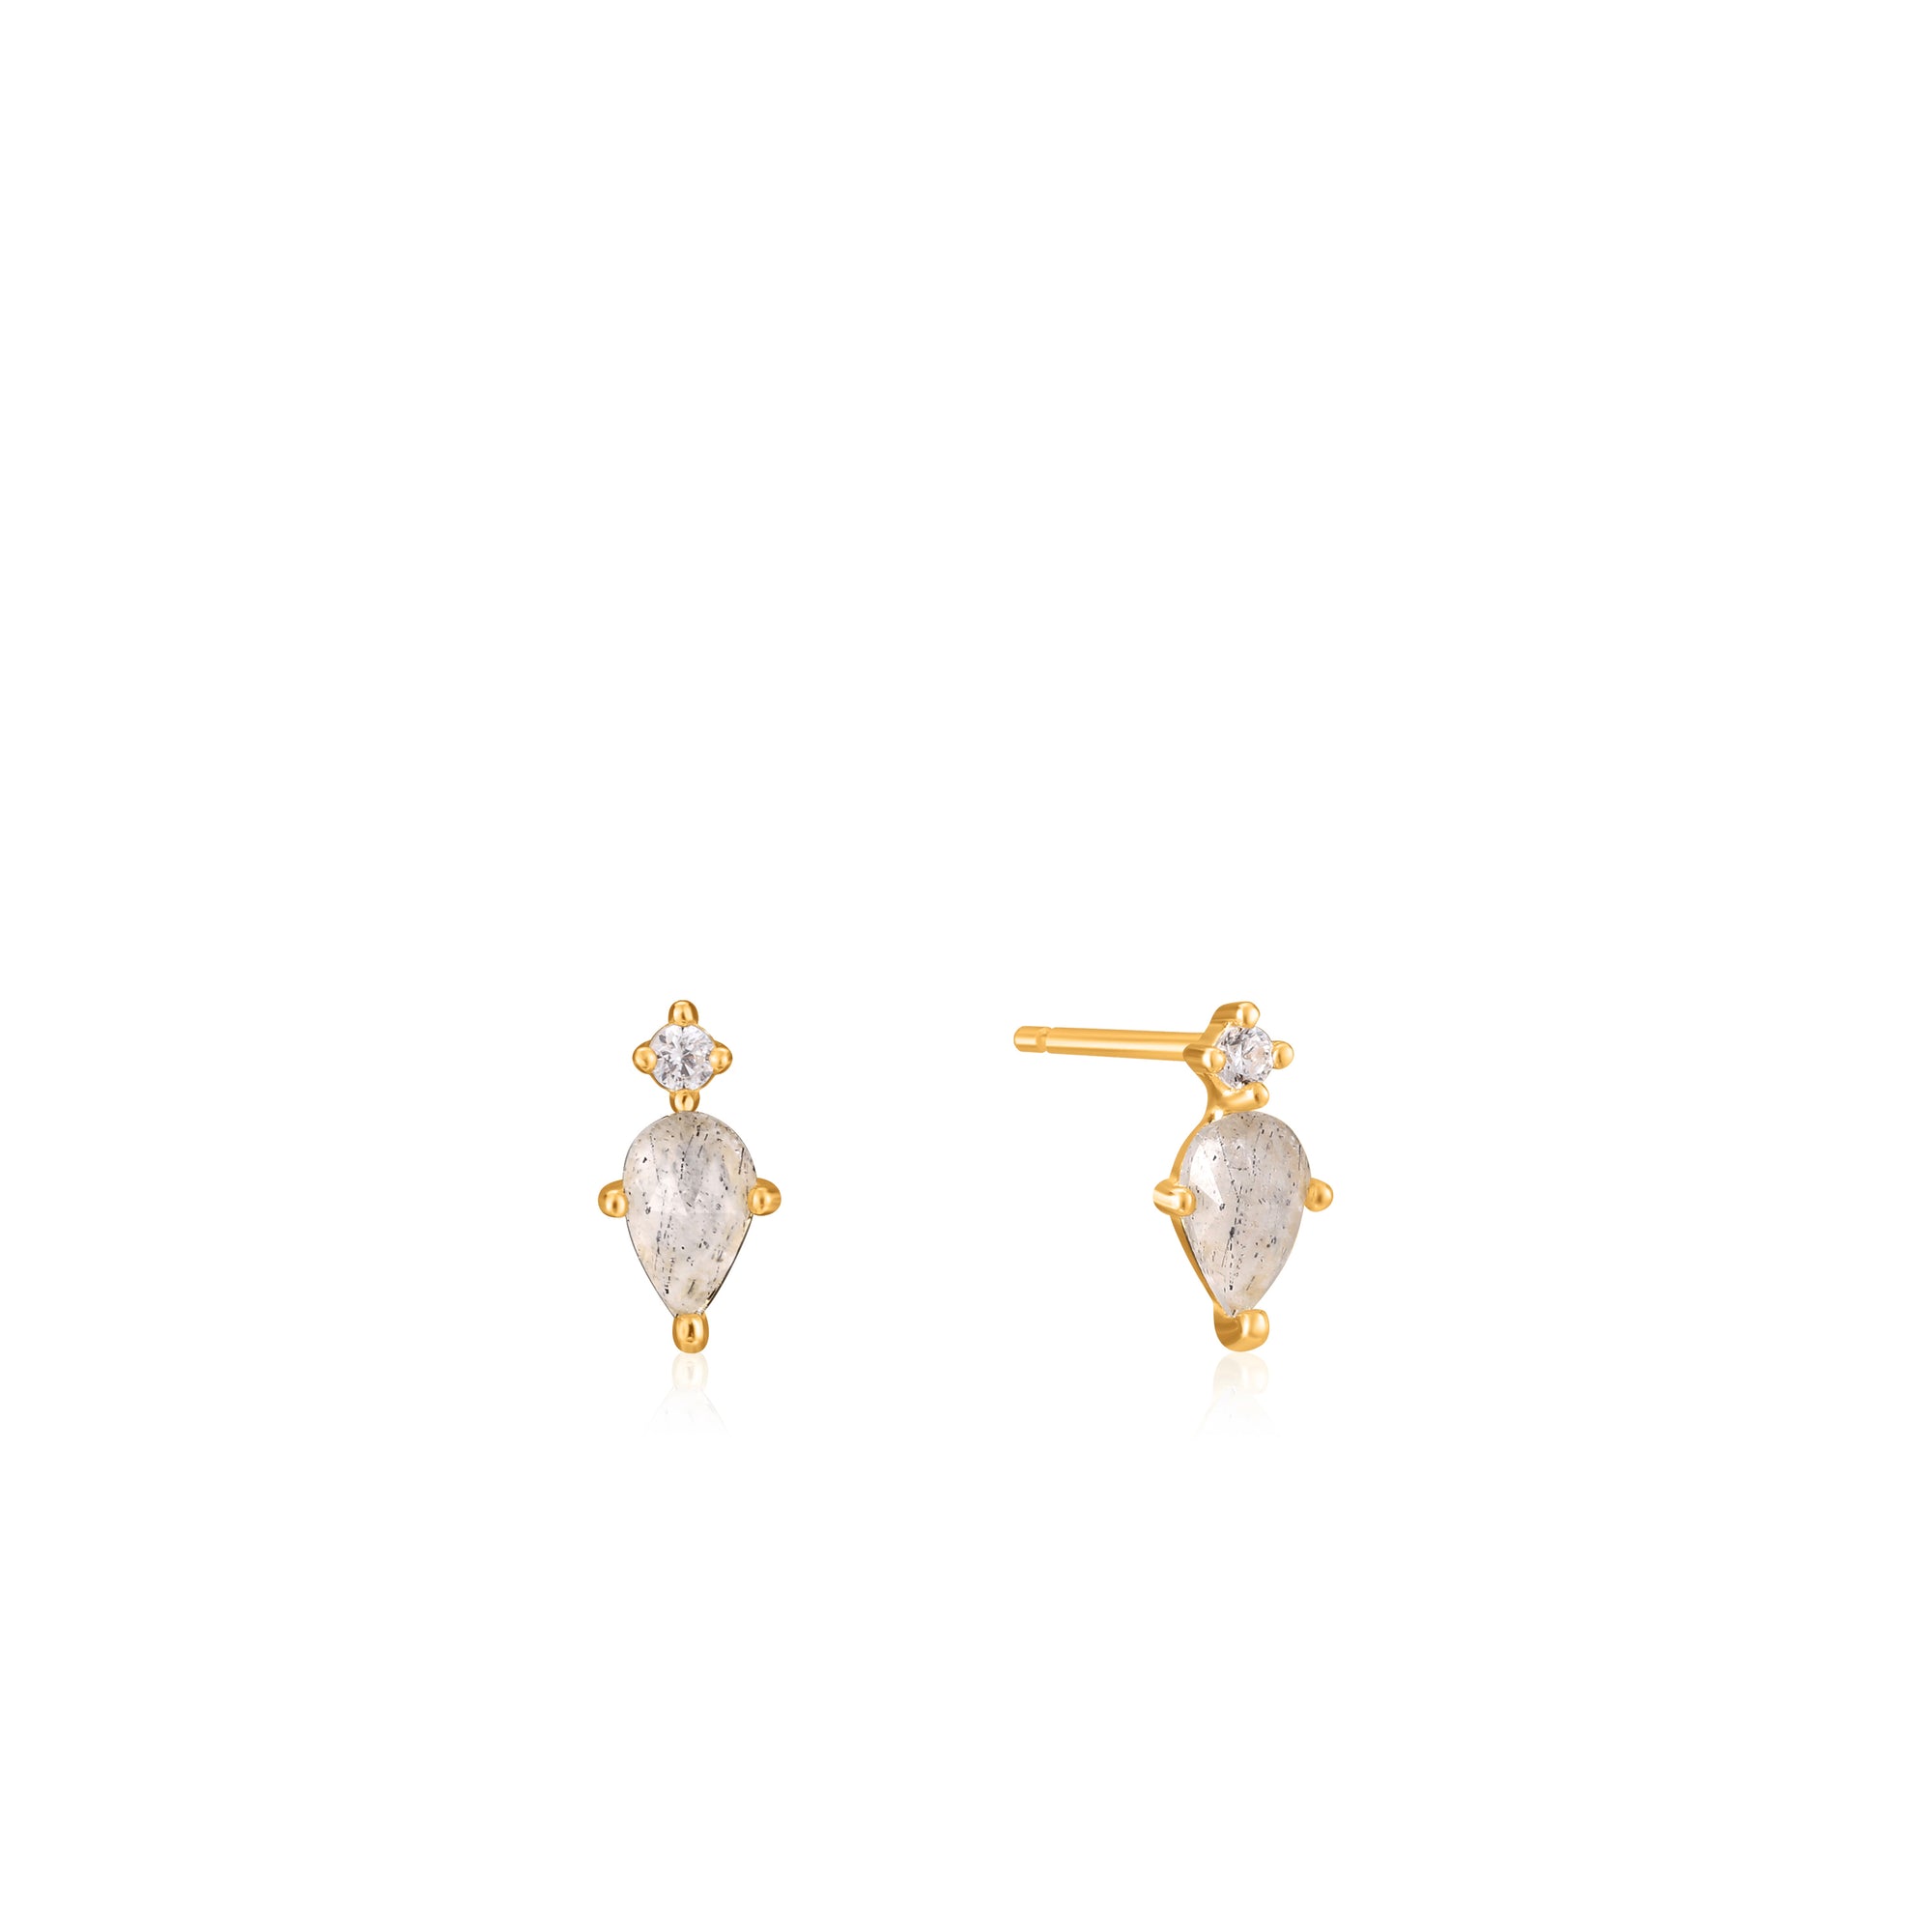 ANIA HAIE ANIA HAIE - Gold Midnight Stud Earrings available at The Good Life Boutique